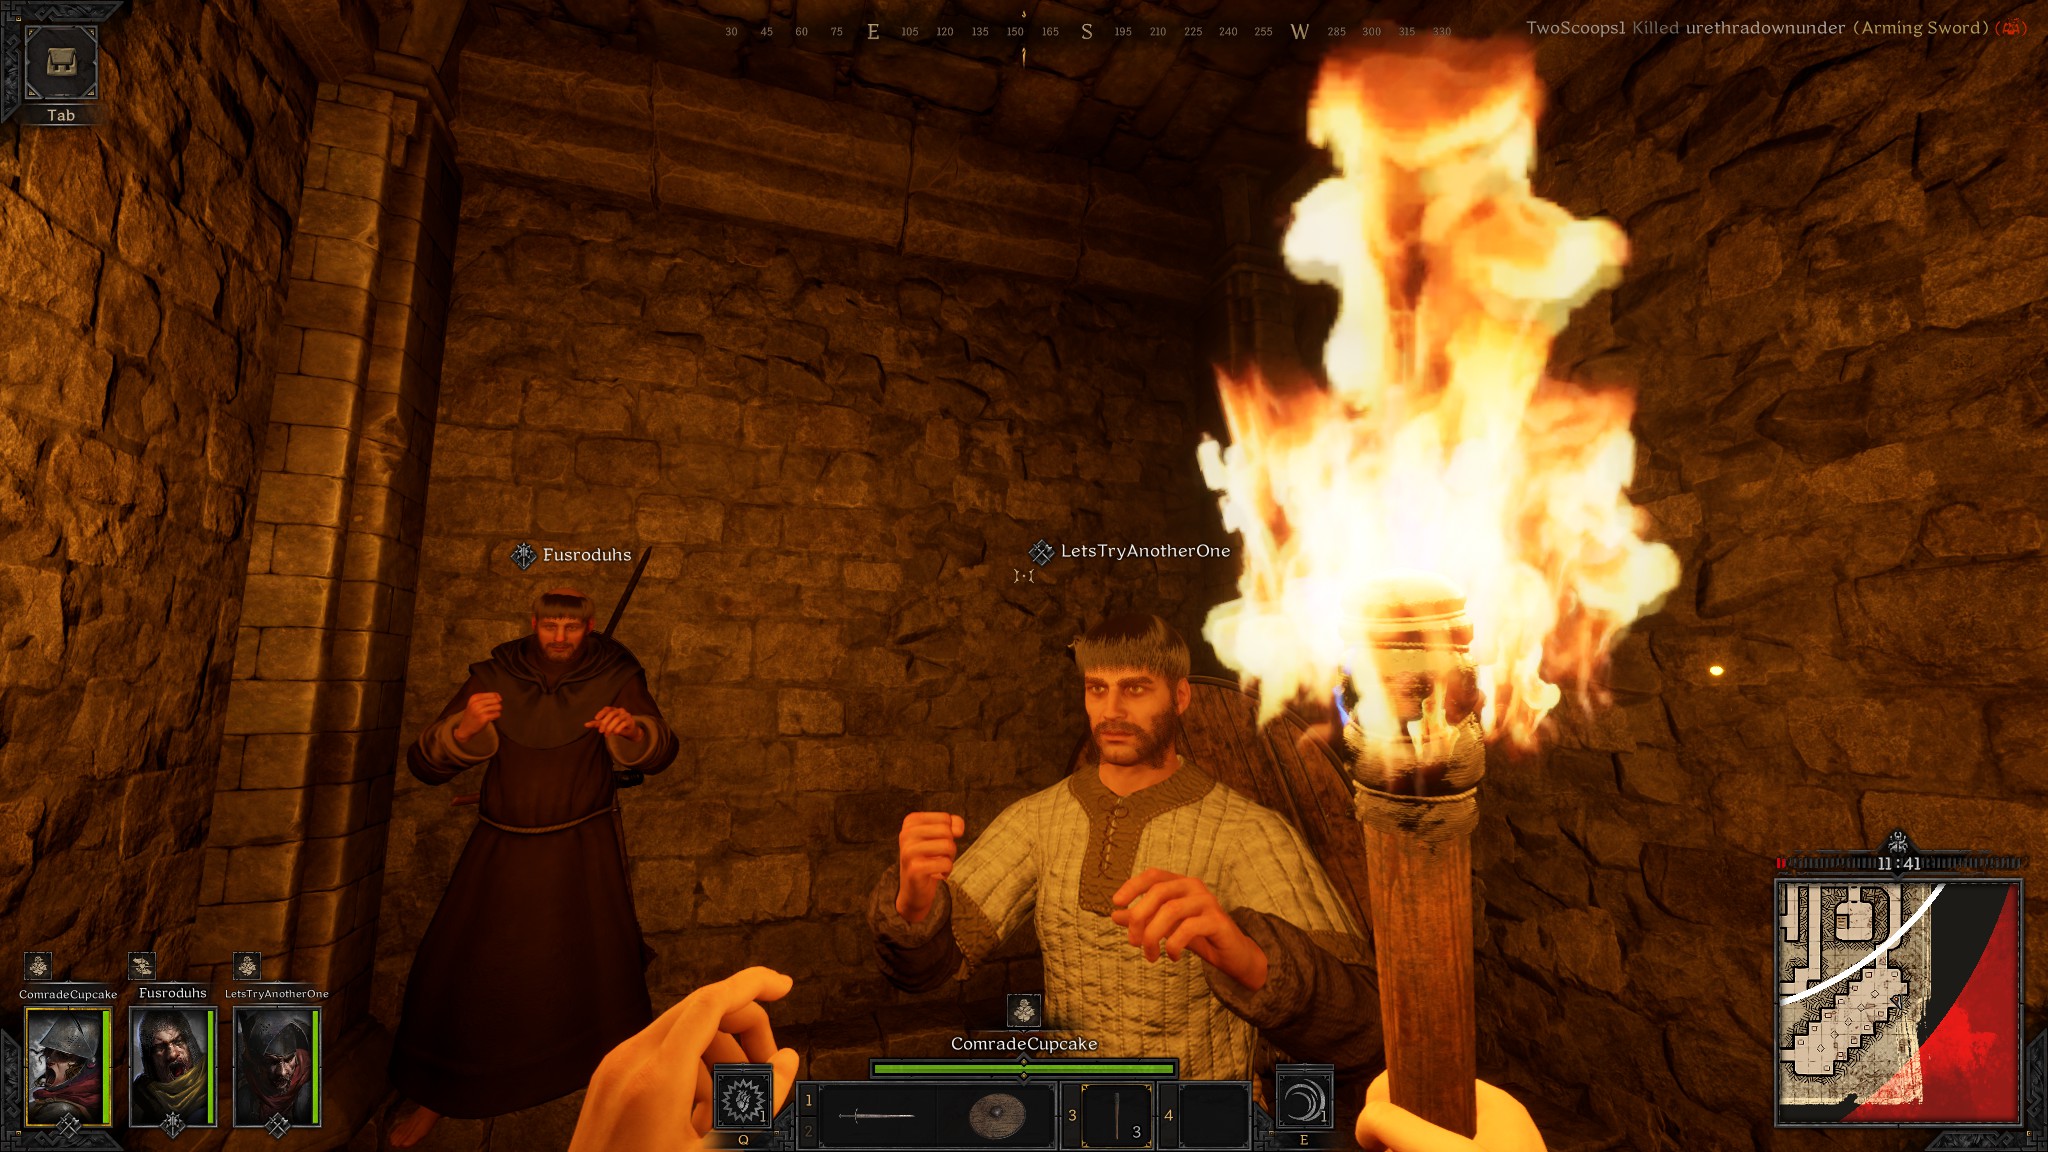  Hit PvP dungeon crawler Dark and Darker will release in early access today, confirms developer 